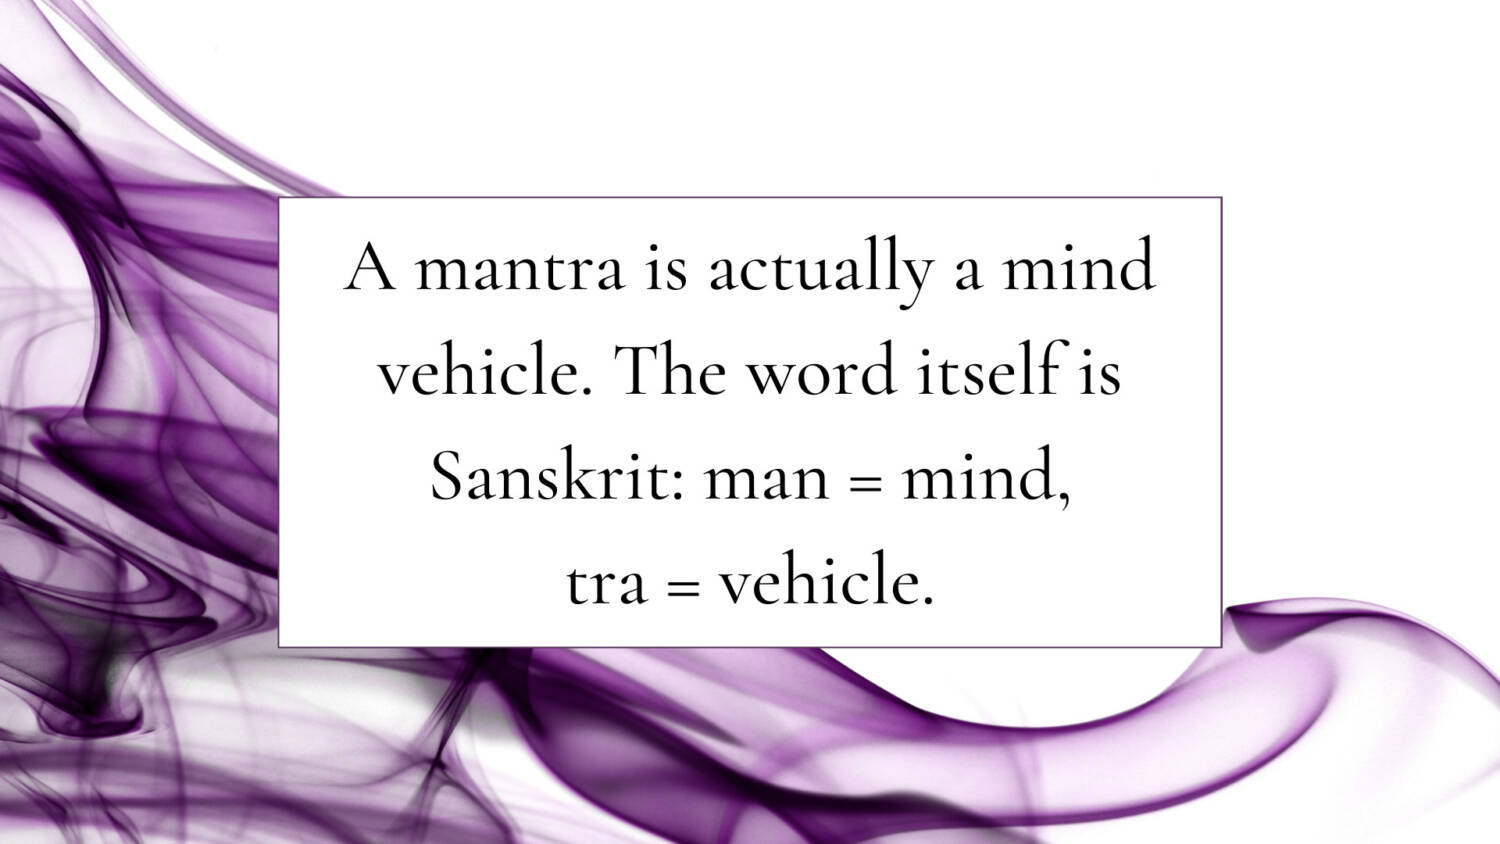 A mantra is actually a mind vehicle. The word itself is Sanskrit: man = mind, tra = vehicle.